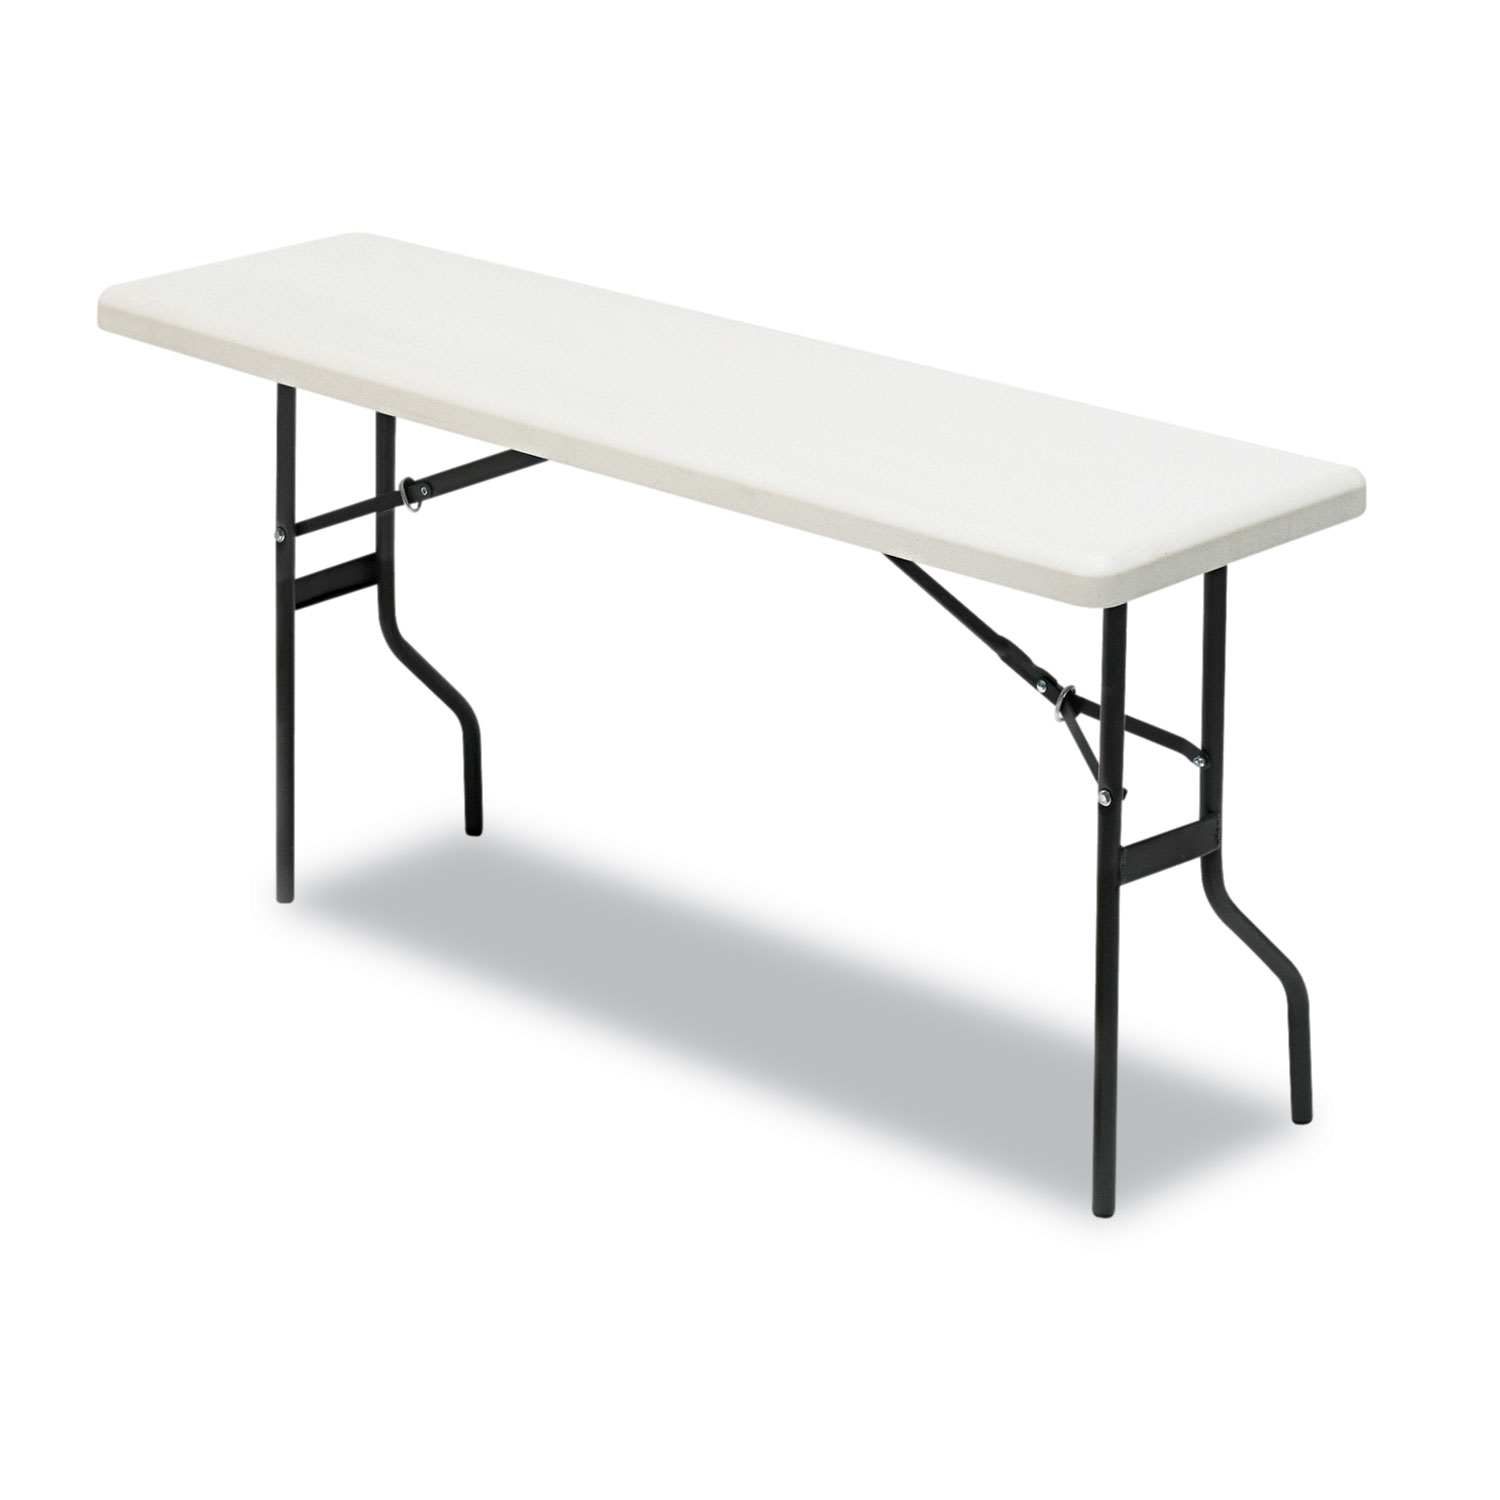  Iceberg 65363 IndestrucTables Too 1200 Series Folding Table, 72w x 18d x 29h, Platinum (ICE65363) 